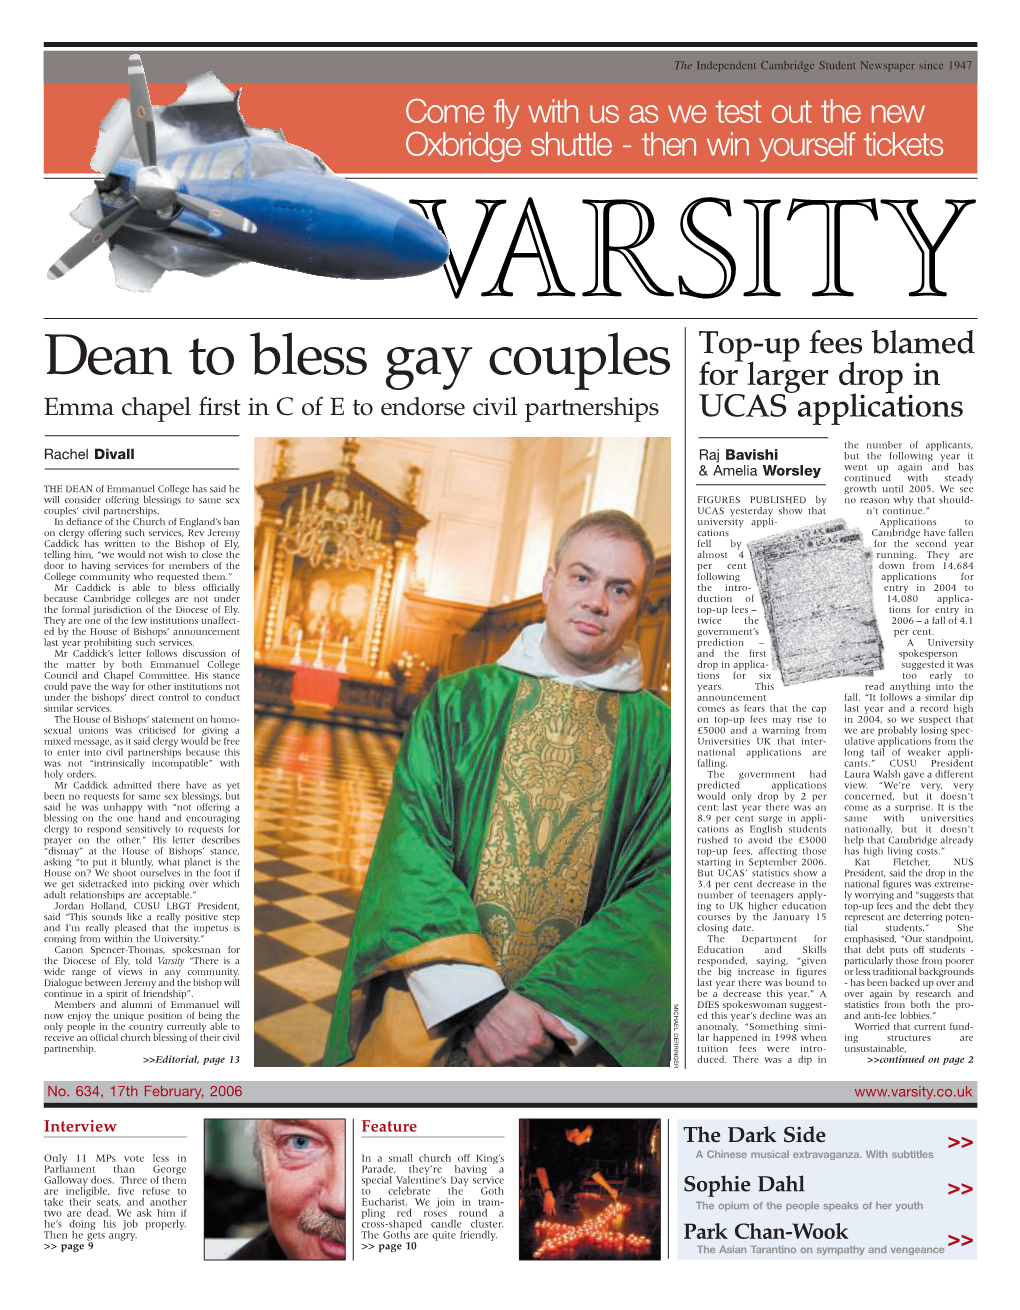 Dean to Bless Gay Couples for Larger Drop in Emma Chapel First in C of E to Endorse Civil Partnerships UCAS Applications